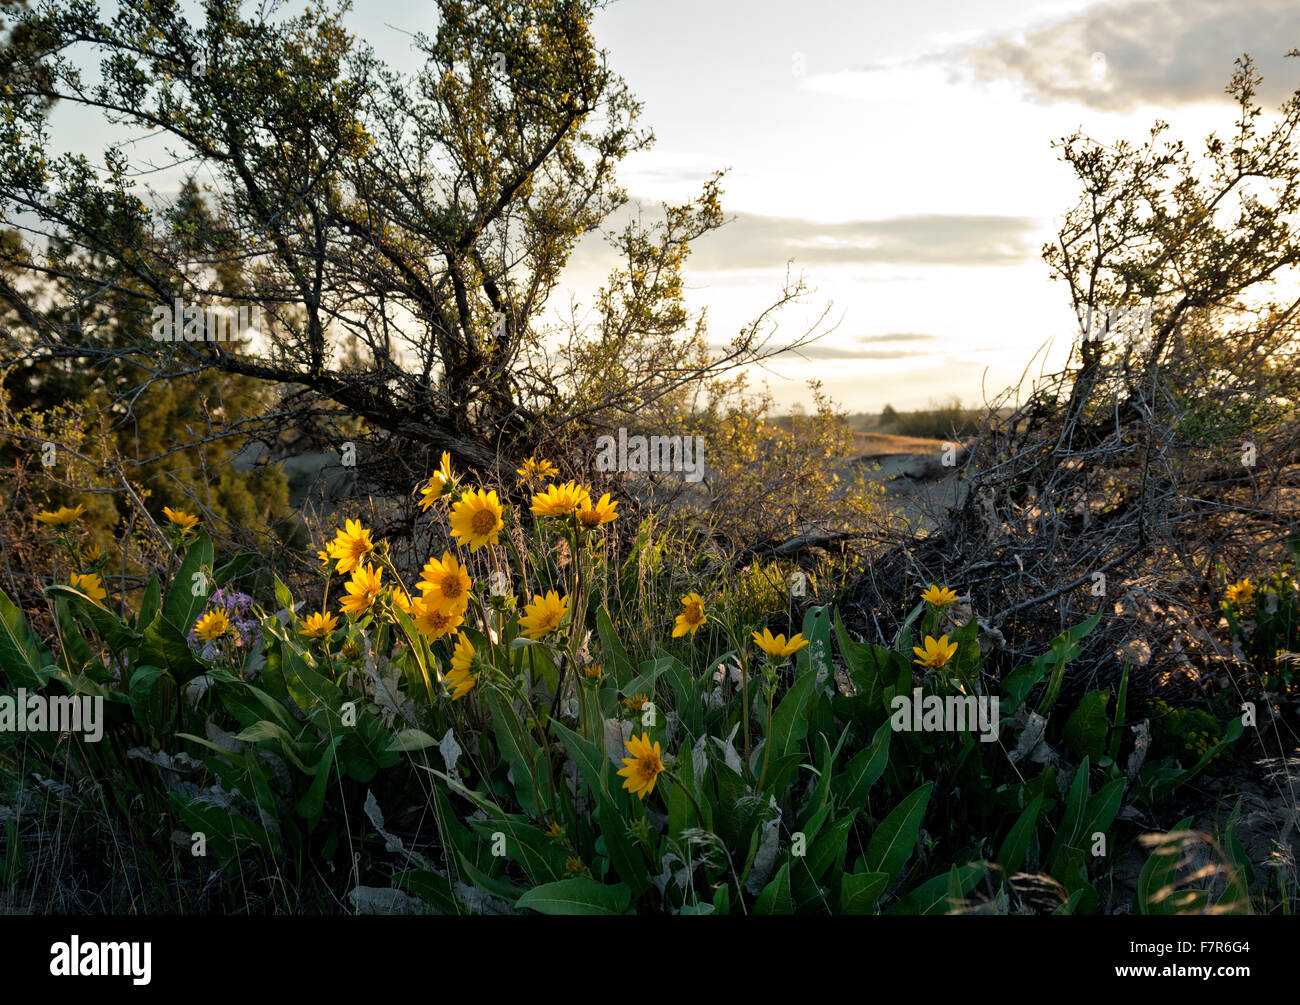 WASHINGTON - Balsamroot blooming under the shade of a gray rabbitbrush in Juniper Dunes Wilderness Area located north of Pasco. Stock Photo